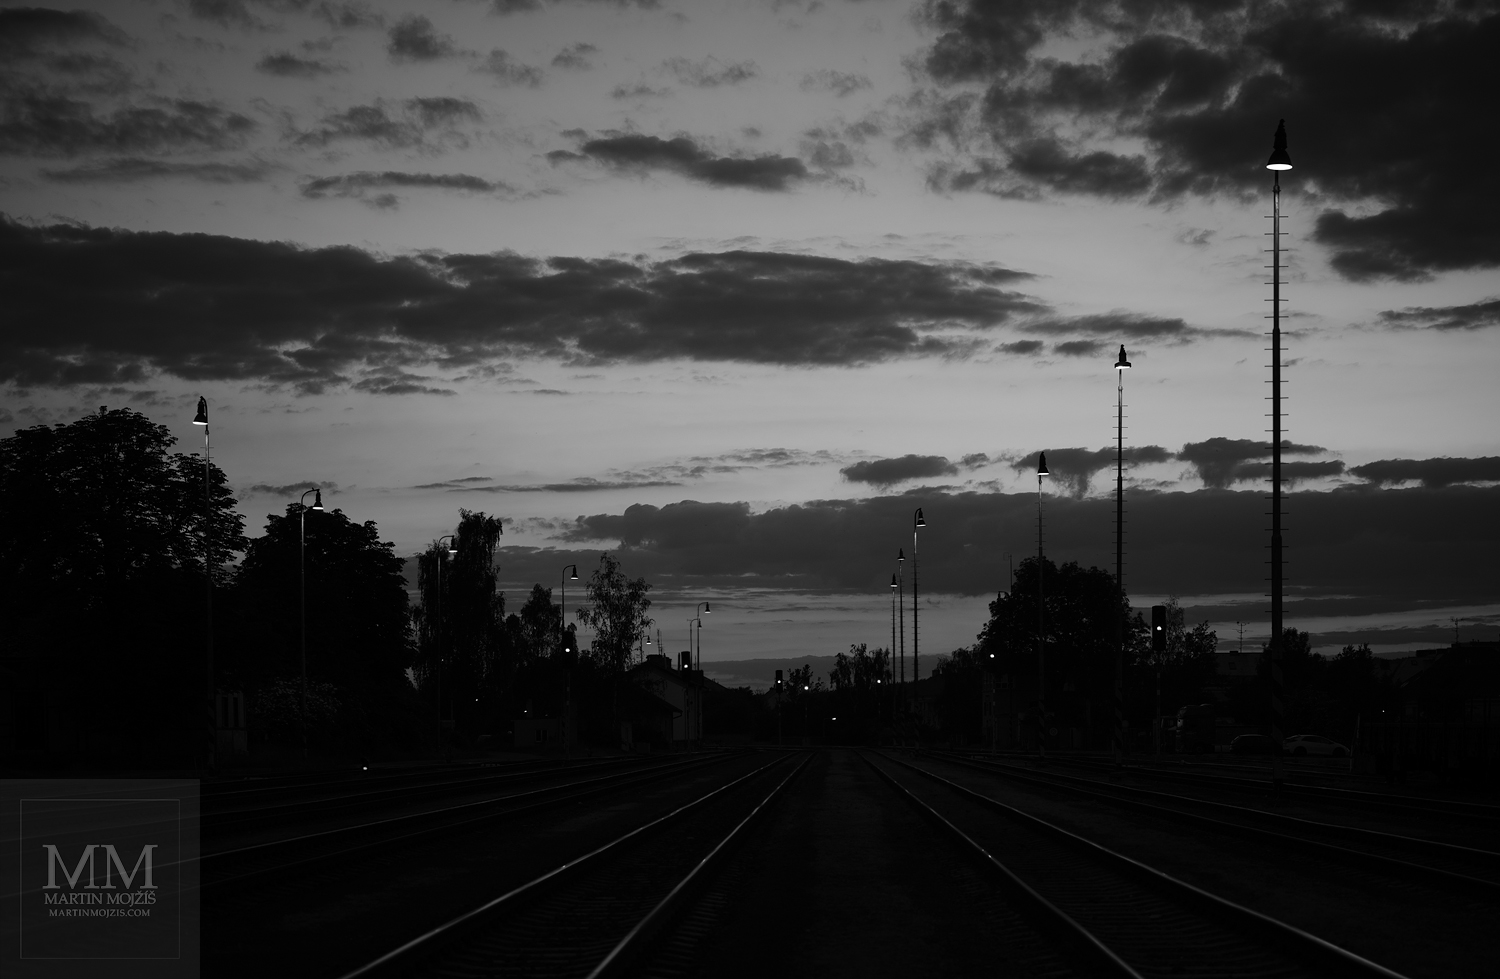 A evening railway station. Fine art black and white photograph TOUCHES OF EVENING LIGHT, photographed by Martin Mojzis.